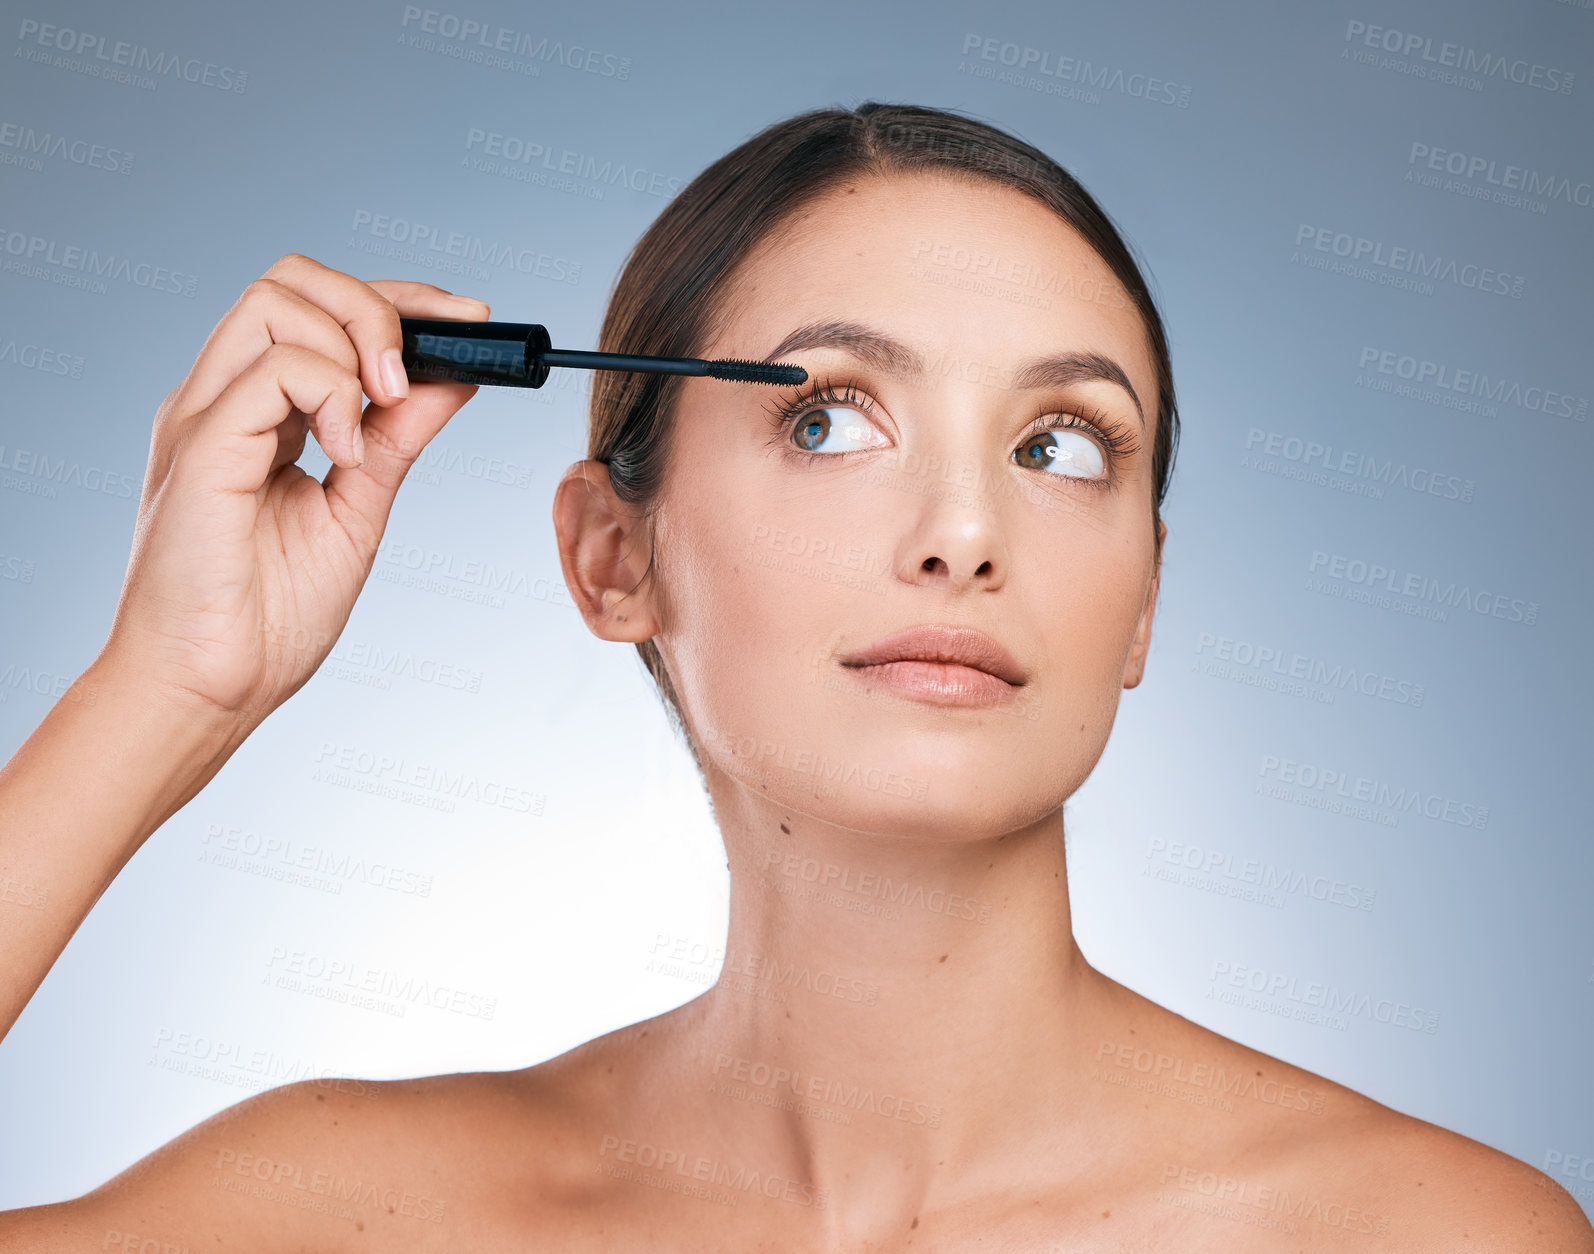 Buy stock photo Shot of a young attractive woman applying makeup against a blue background